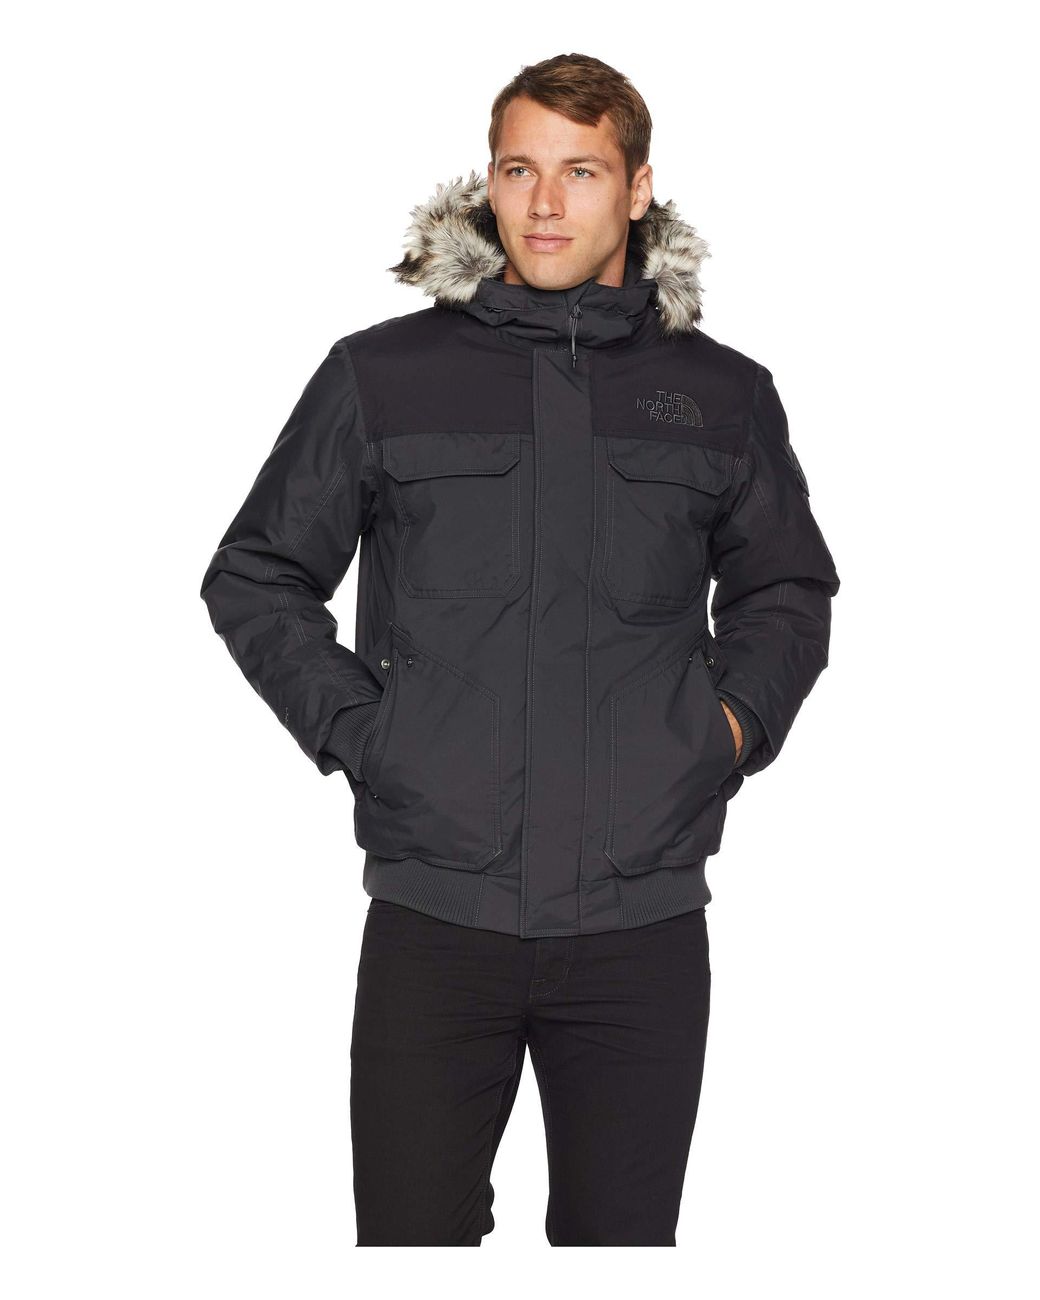 The North Face Gotham Jacket Iii in Black for Men - Lyst